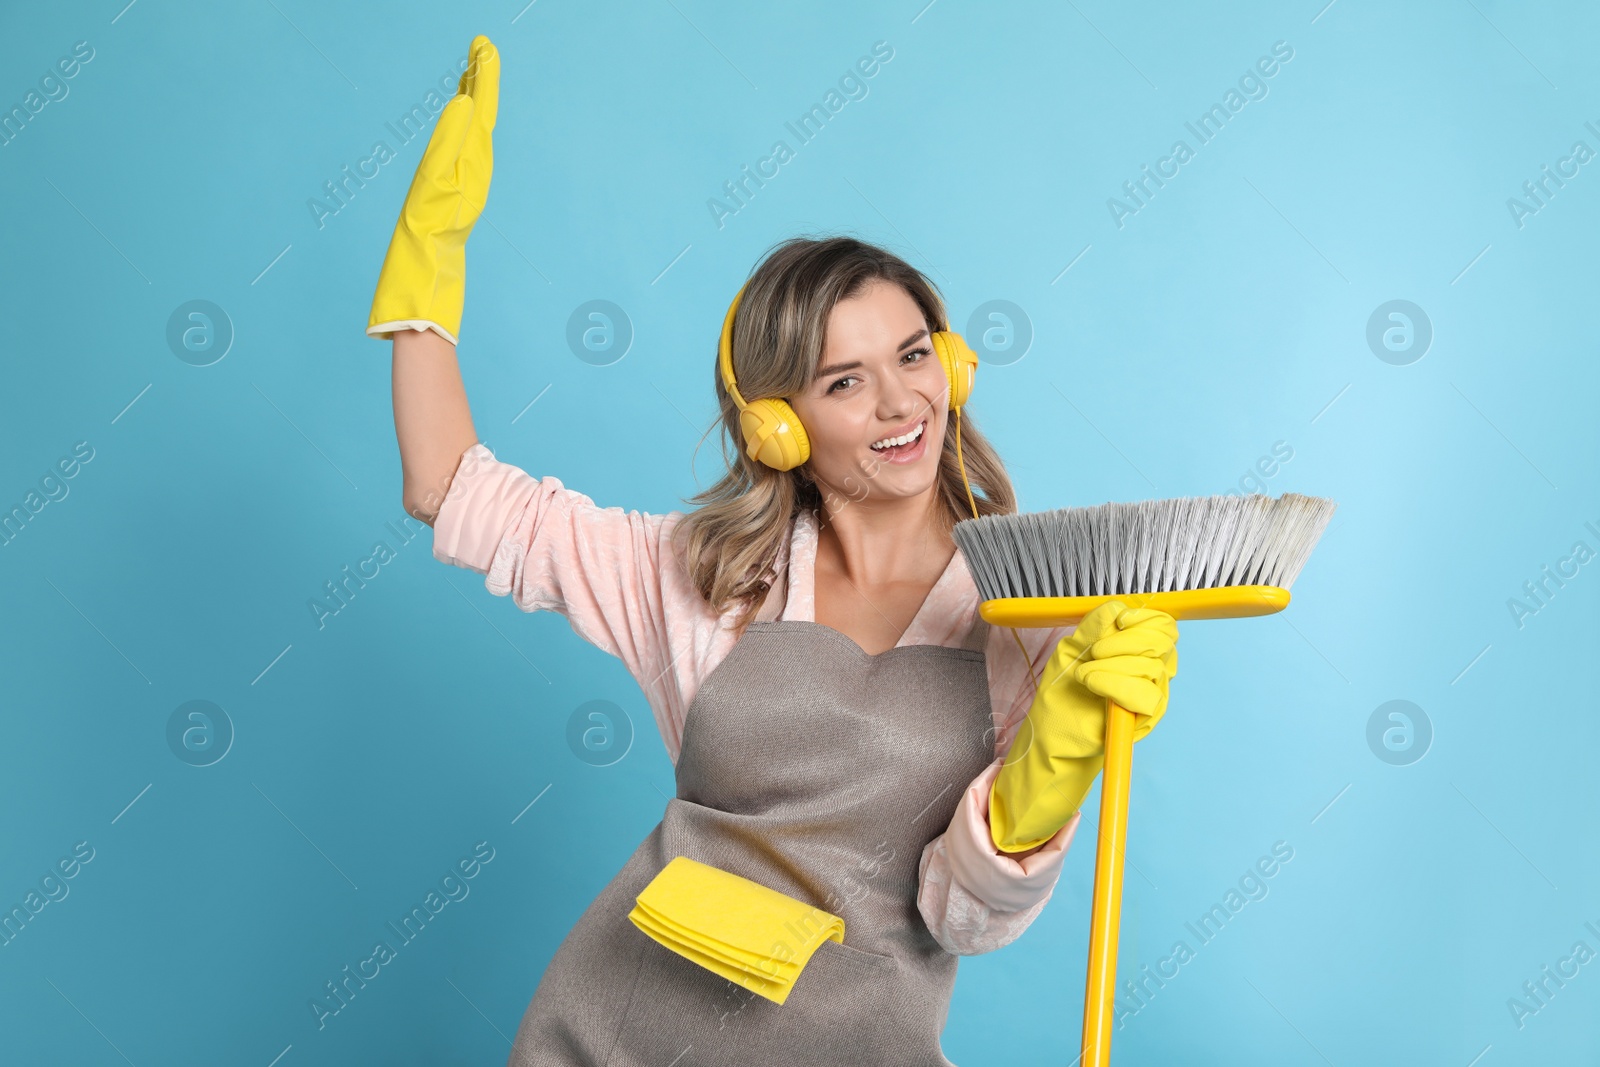 Photo of Beautiful young woman with headphones and floor brush singing on light blue background